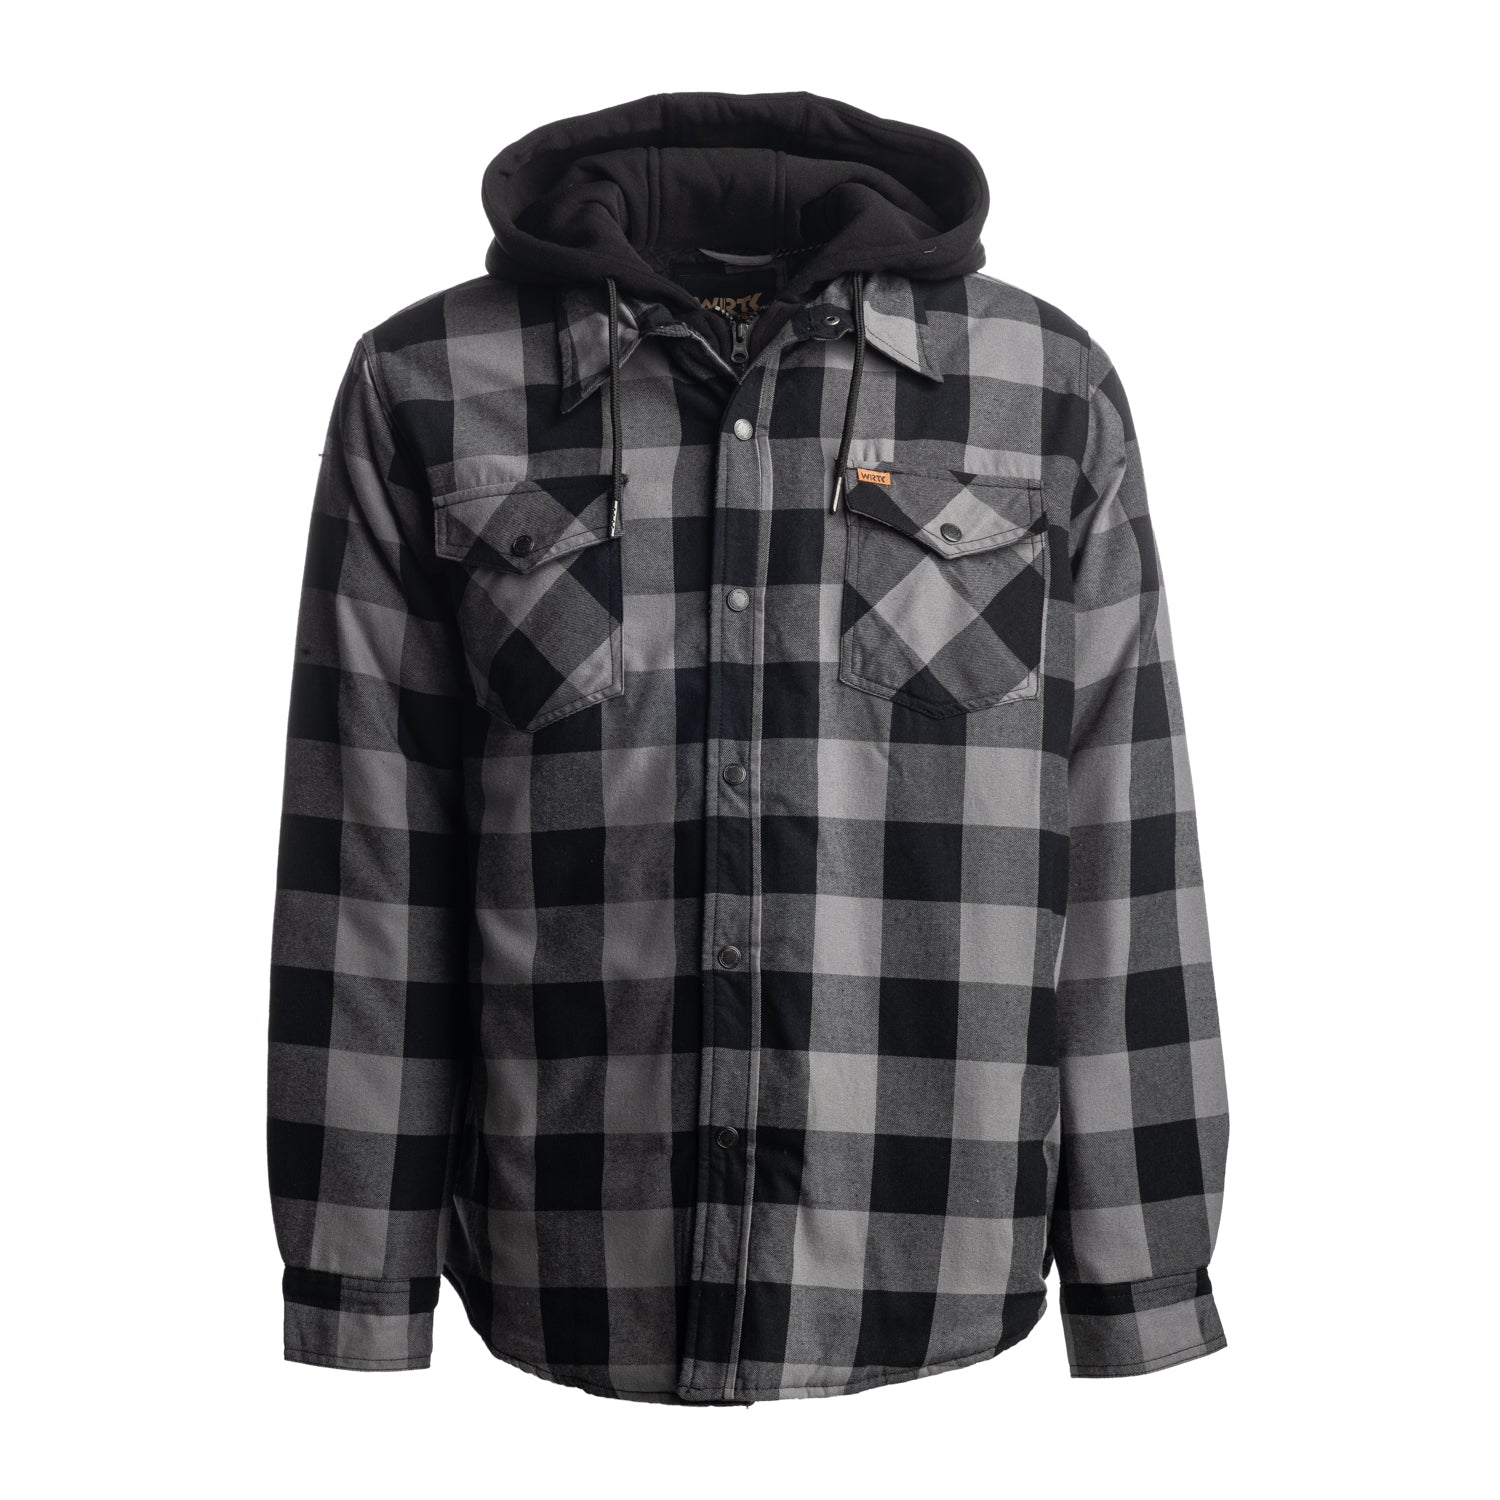 Tough Duck Mens Tough Duck Bomber with HoodJackets : : Clothing,  Shoes & Accessories